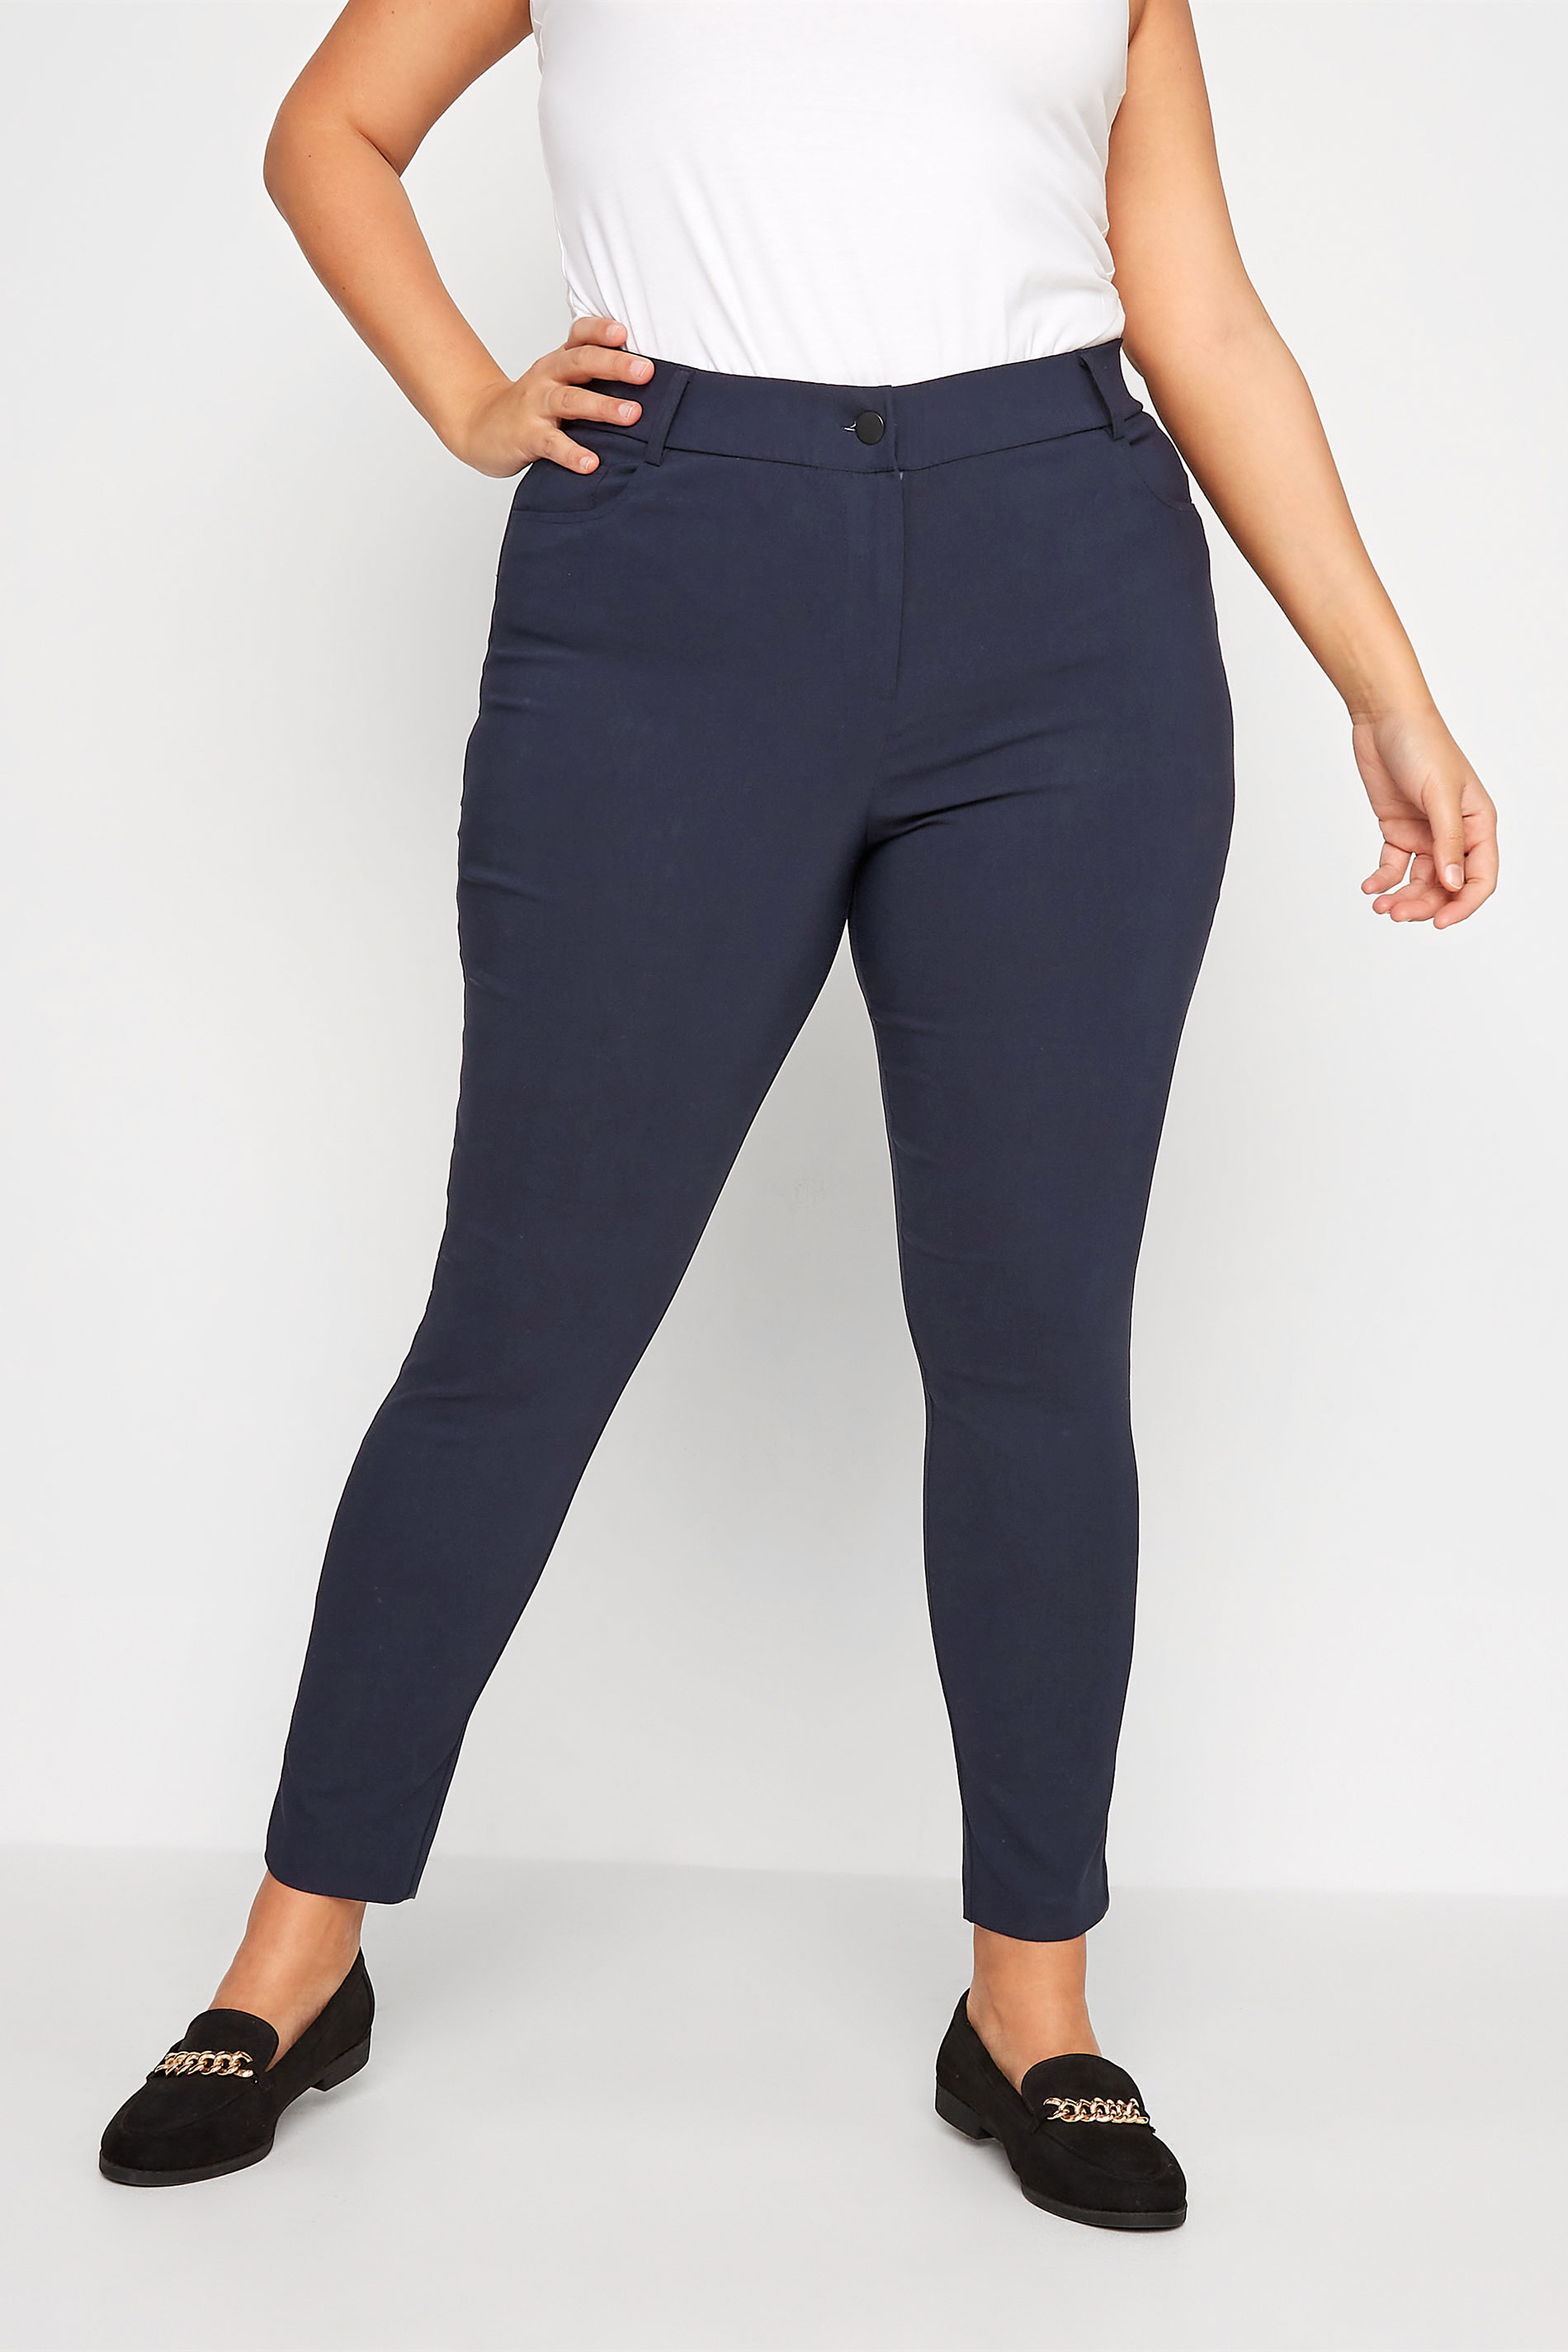 Curve Plus Size Navy Blue Bengaline Pull On Stretch Trousers - Petite | Yours Clothing 1